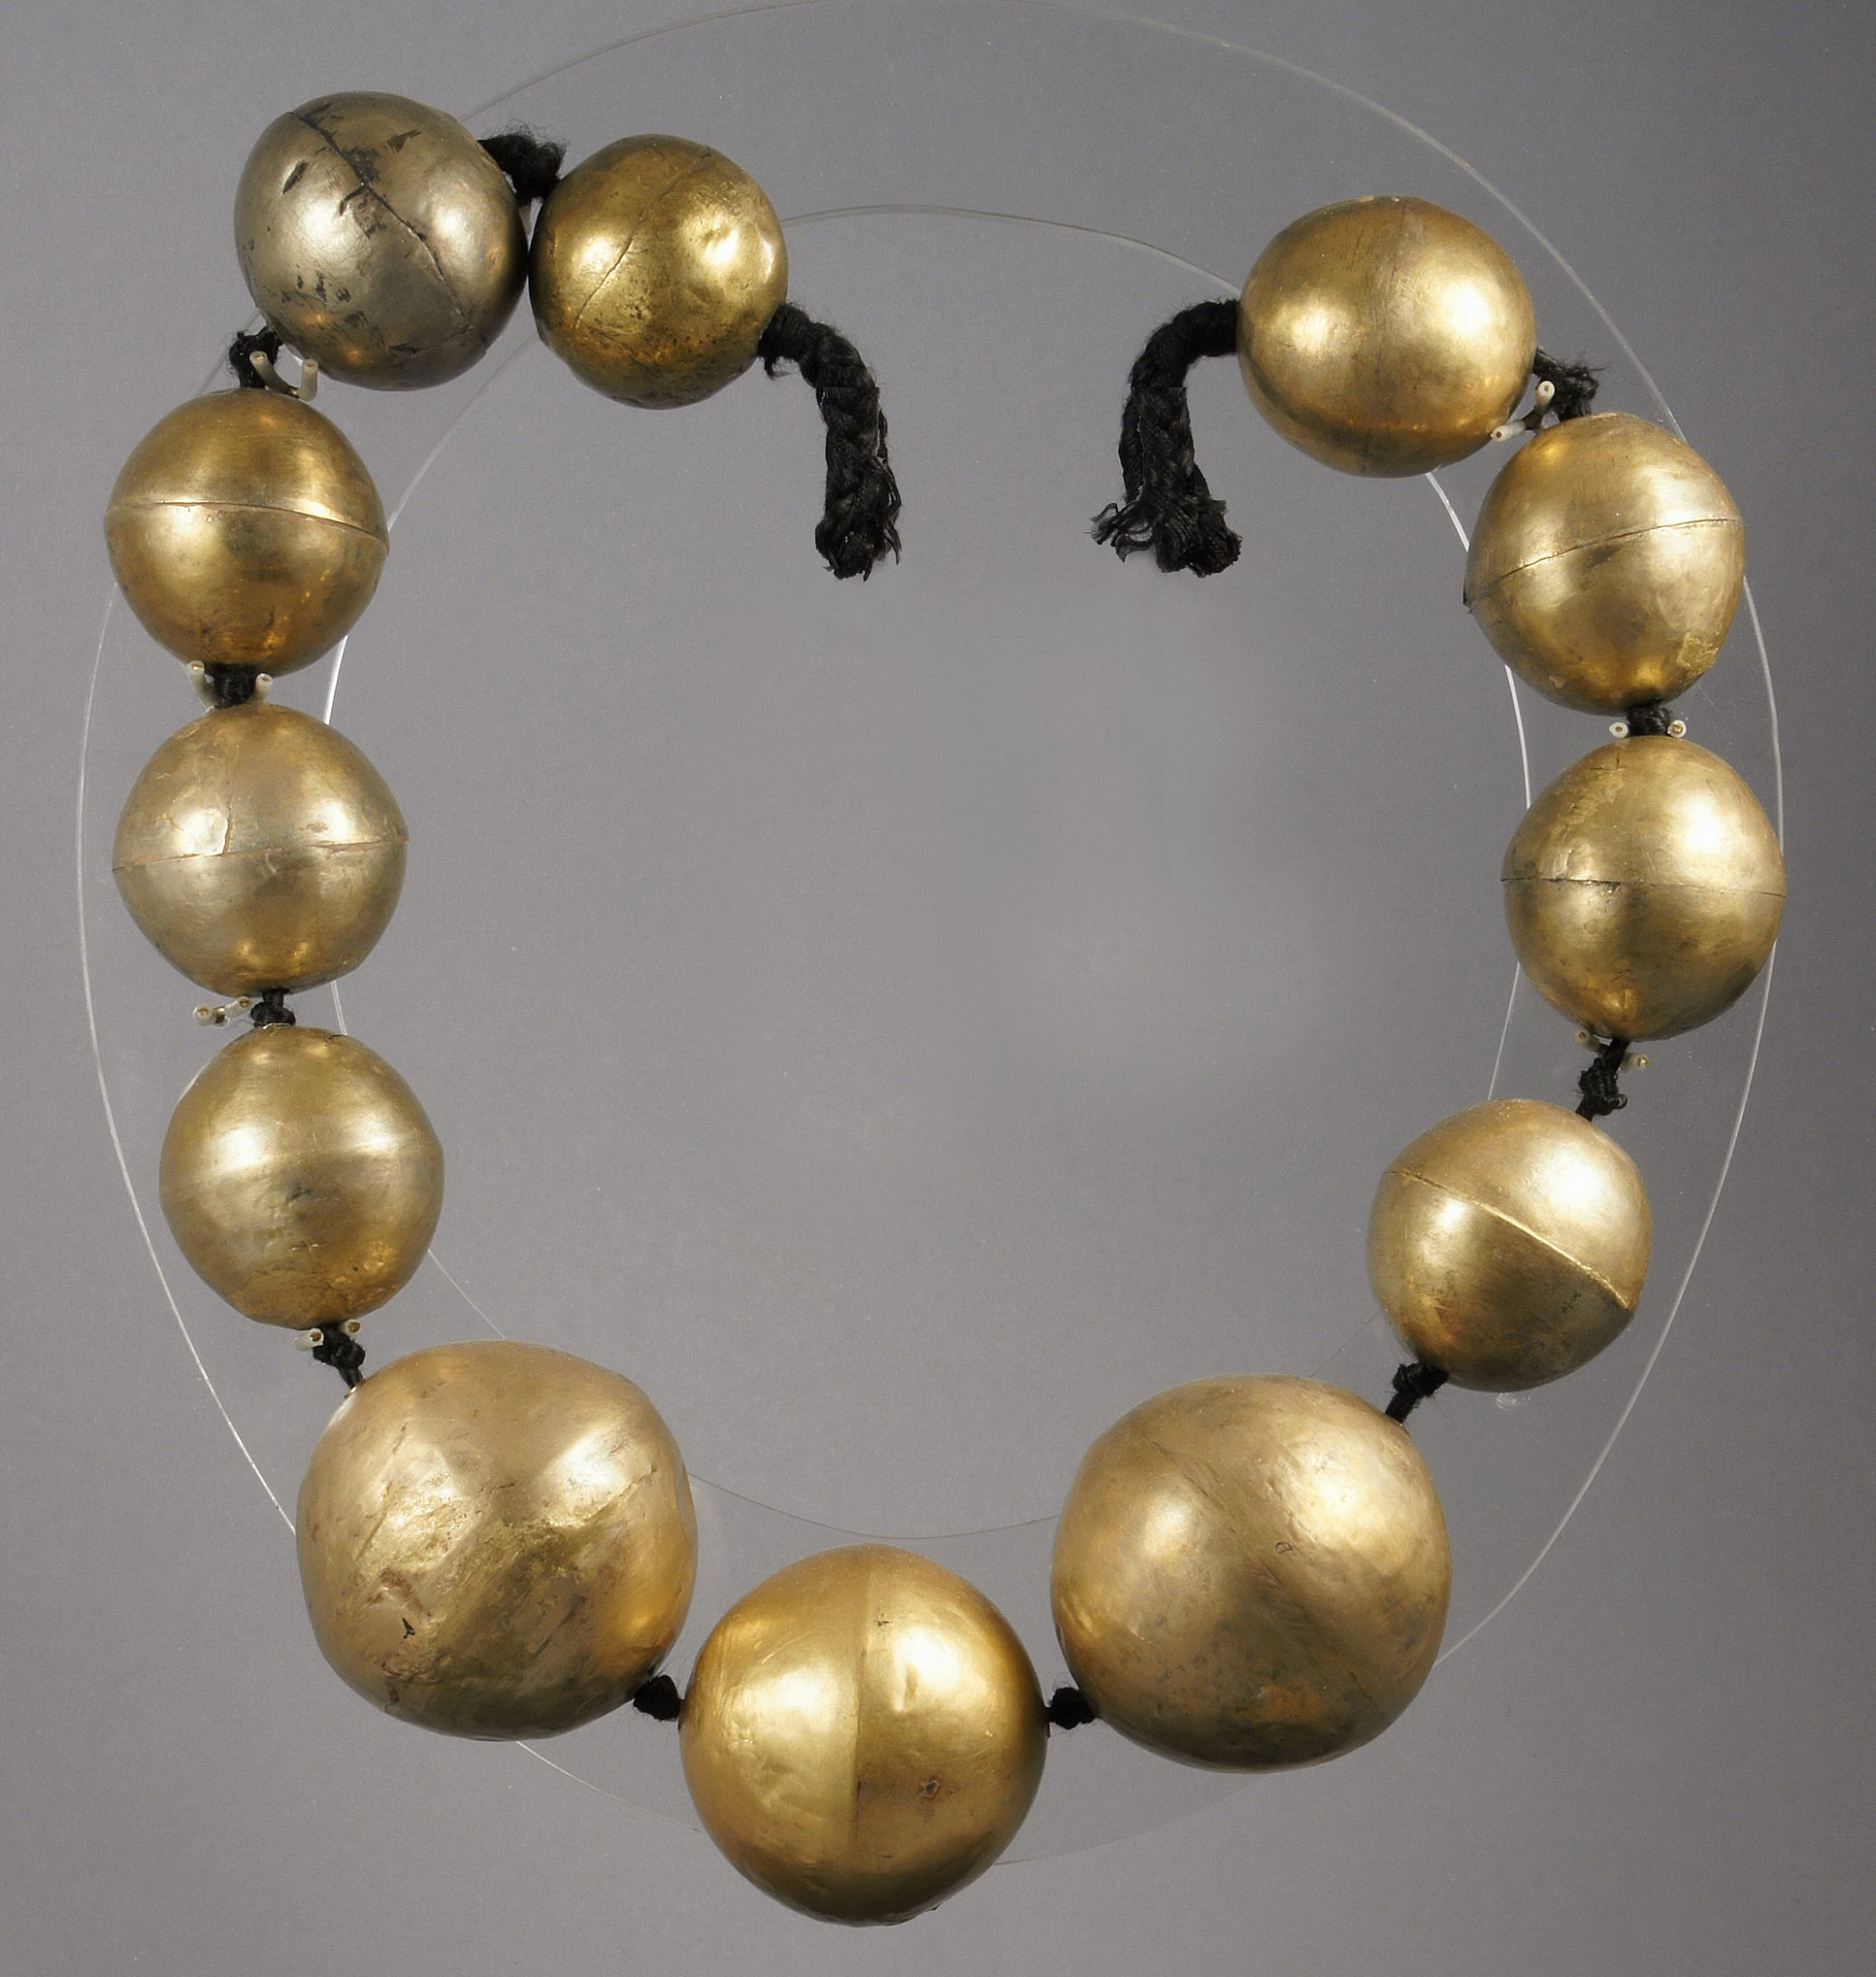 Peru, Chimú Gold 29" Necklace of Large Hollow Beads
The Chimú inherited a taste for hollow gold bead necklaces from their Moche predecessors. In both cultures, each bead was cast and hammered in two halves that were then joined together by soldering. In the Chimú technique, the edges of the two halves were nested together.  These beads are extremely light with a greater percentage of silver than gold.  They used depletion gilding to bring the gold to the surface by using of heats and salts.    This allowed the Chimu to make the gold available for a large and growing ruling class. Private Florida collection prior to 1980.
Media: Metal
Dimensions: Necklace Length: 29"; largest bead 2 1/4" diameter - smallest 1 1/2"
$21,000
M7991